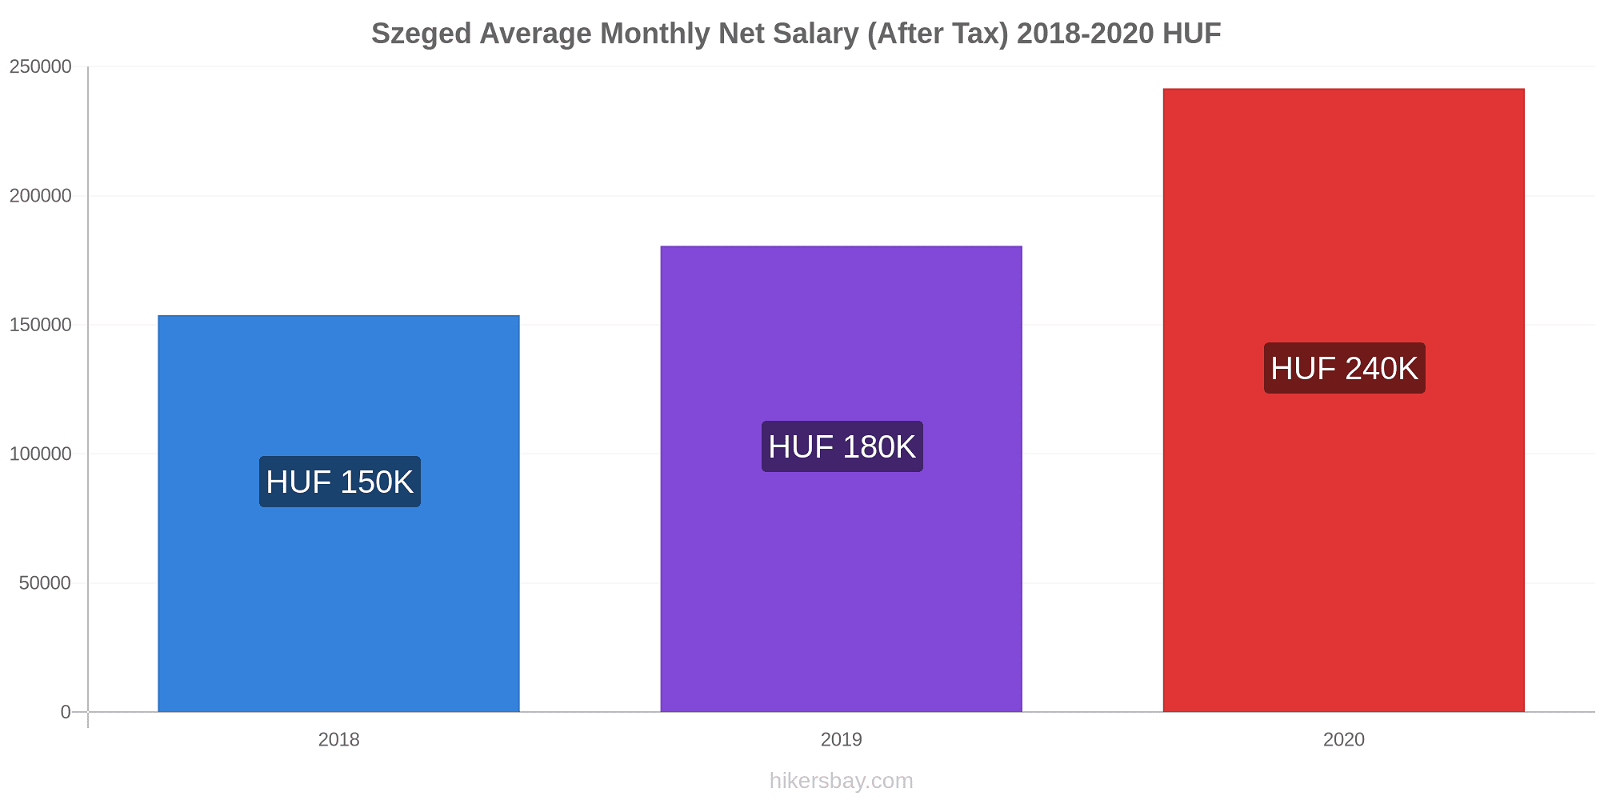 Szeged price changes Average Monthly Net Salary (After Tax) hikersbay.com